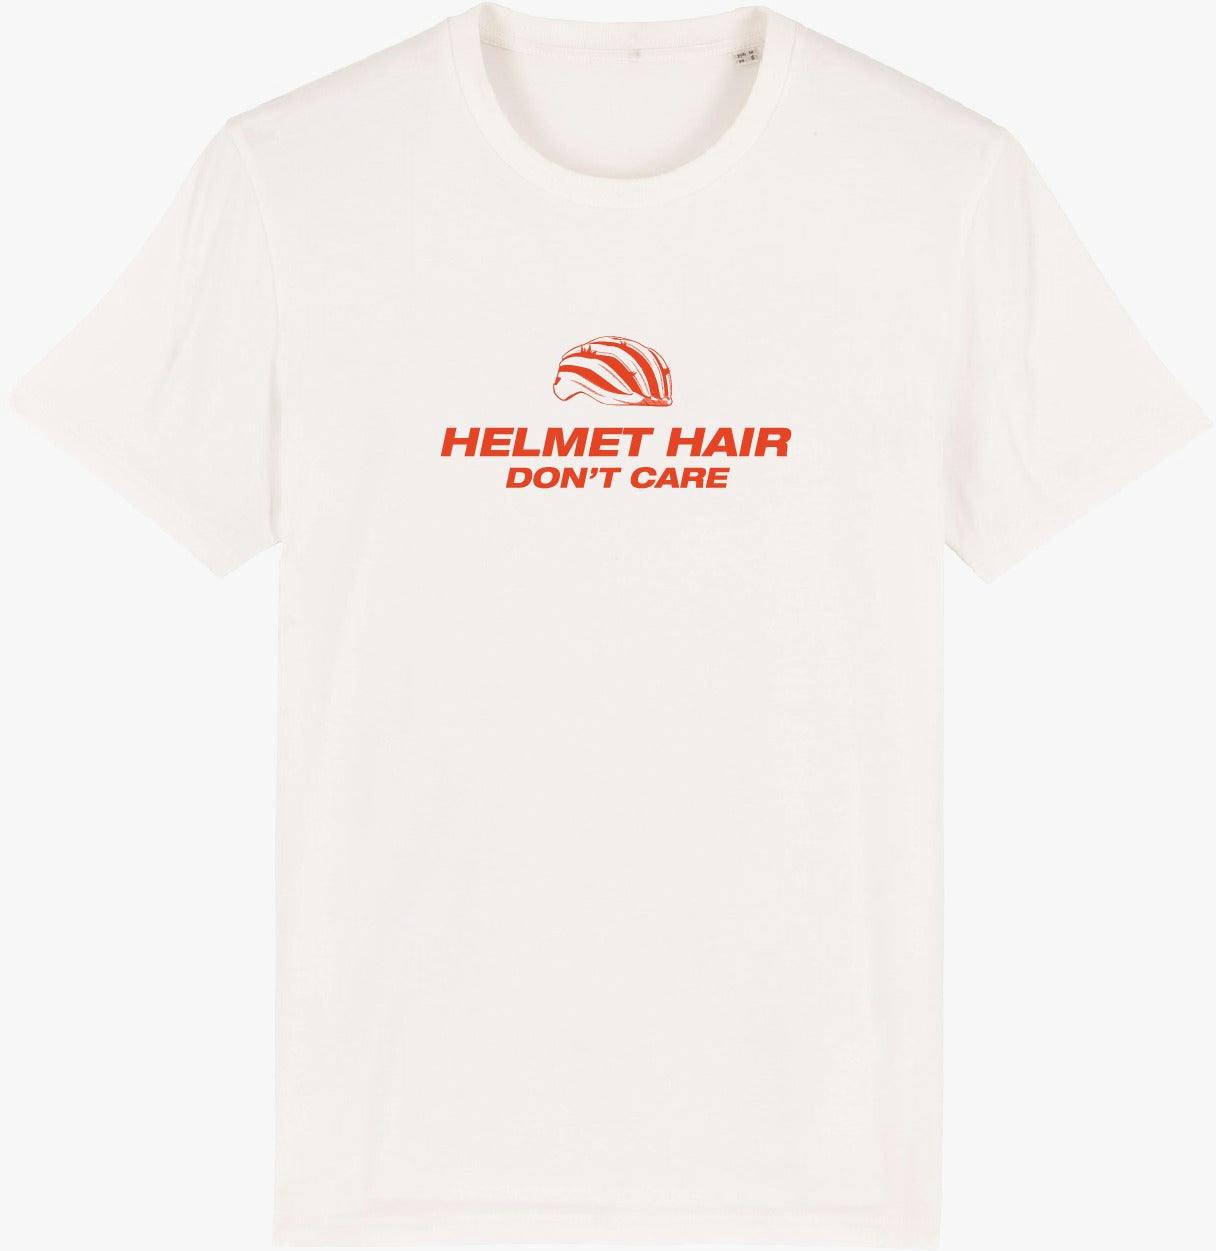 Helmet hair don't care unisex cycling T-shirt (offwhite - bright red)